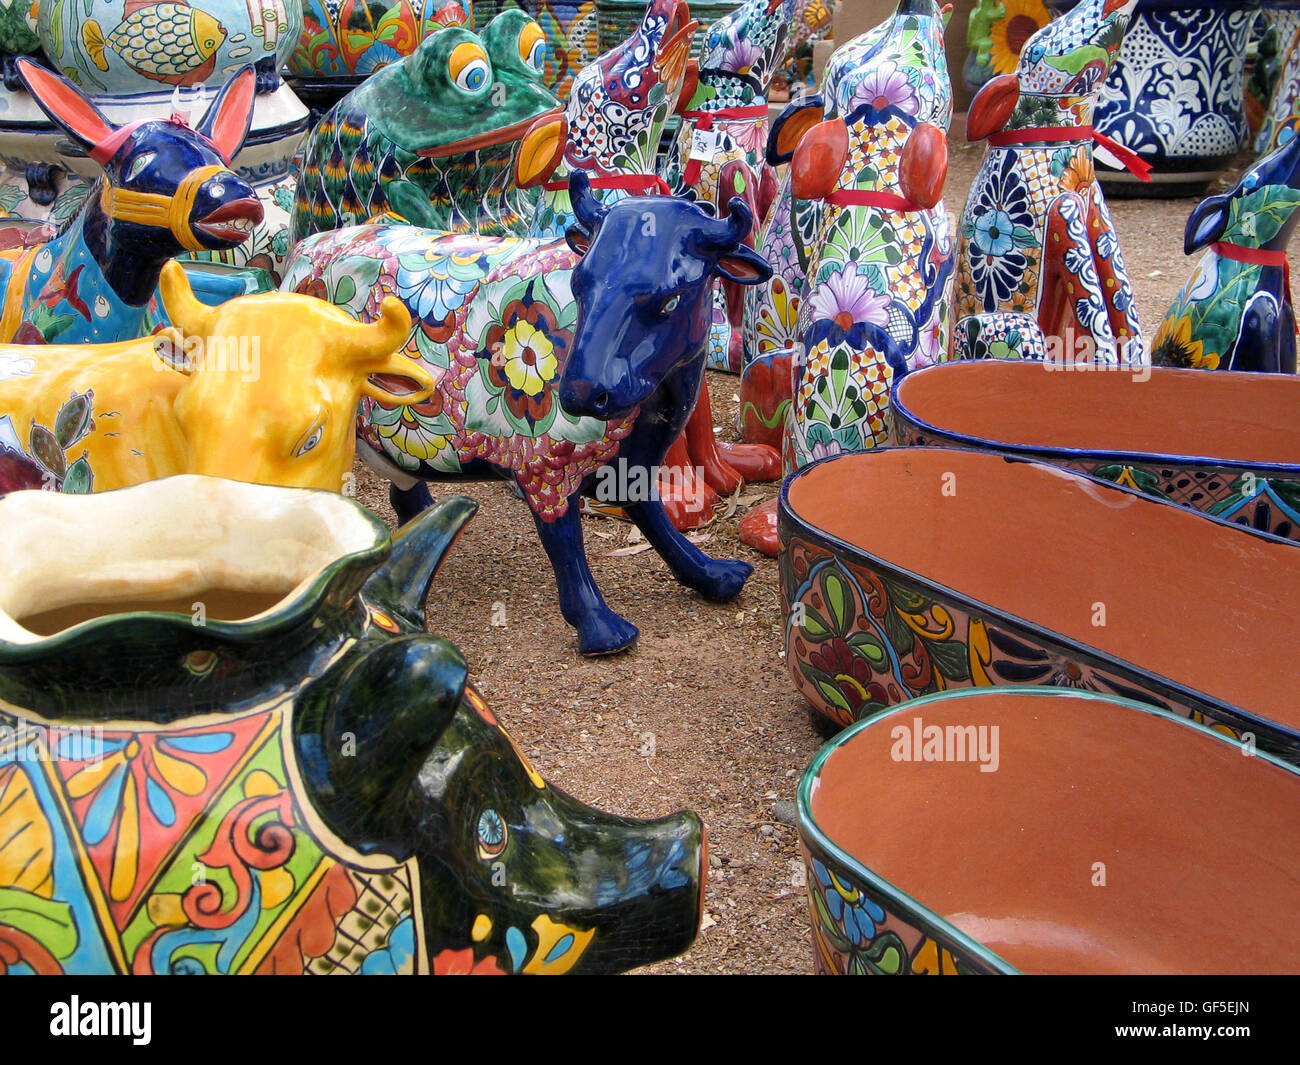 A wild collection of brightly glazed pottery and southwestern art are gathered at an open market in Tucson, Arizona, USA. Stock Photo